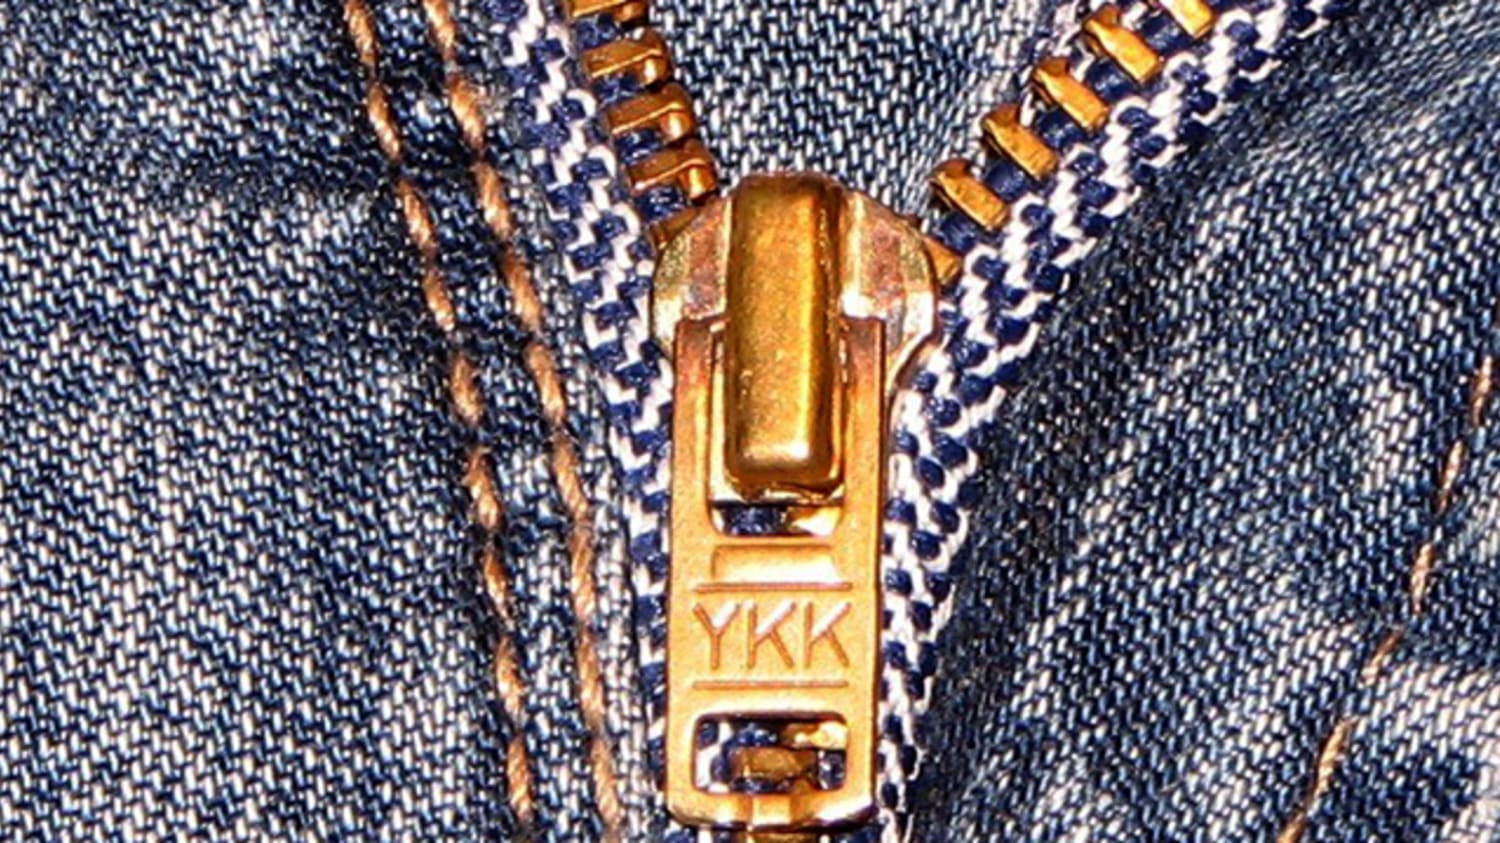 Why Do All Zippers Have the Letters YKK on Them?